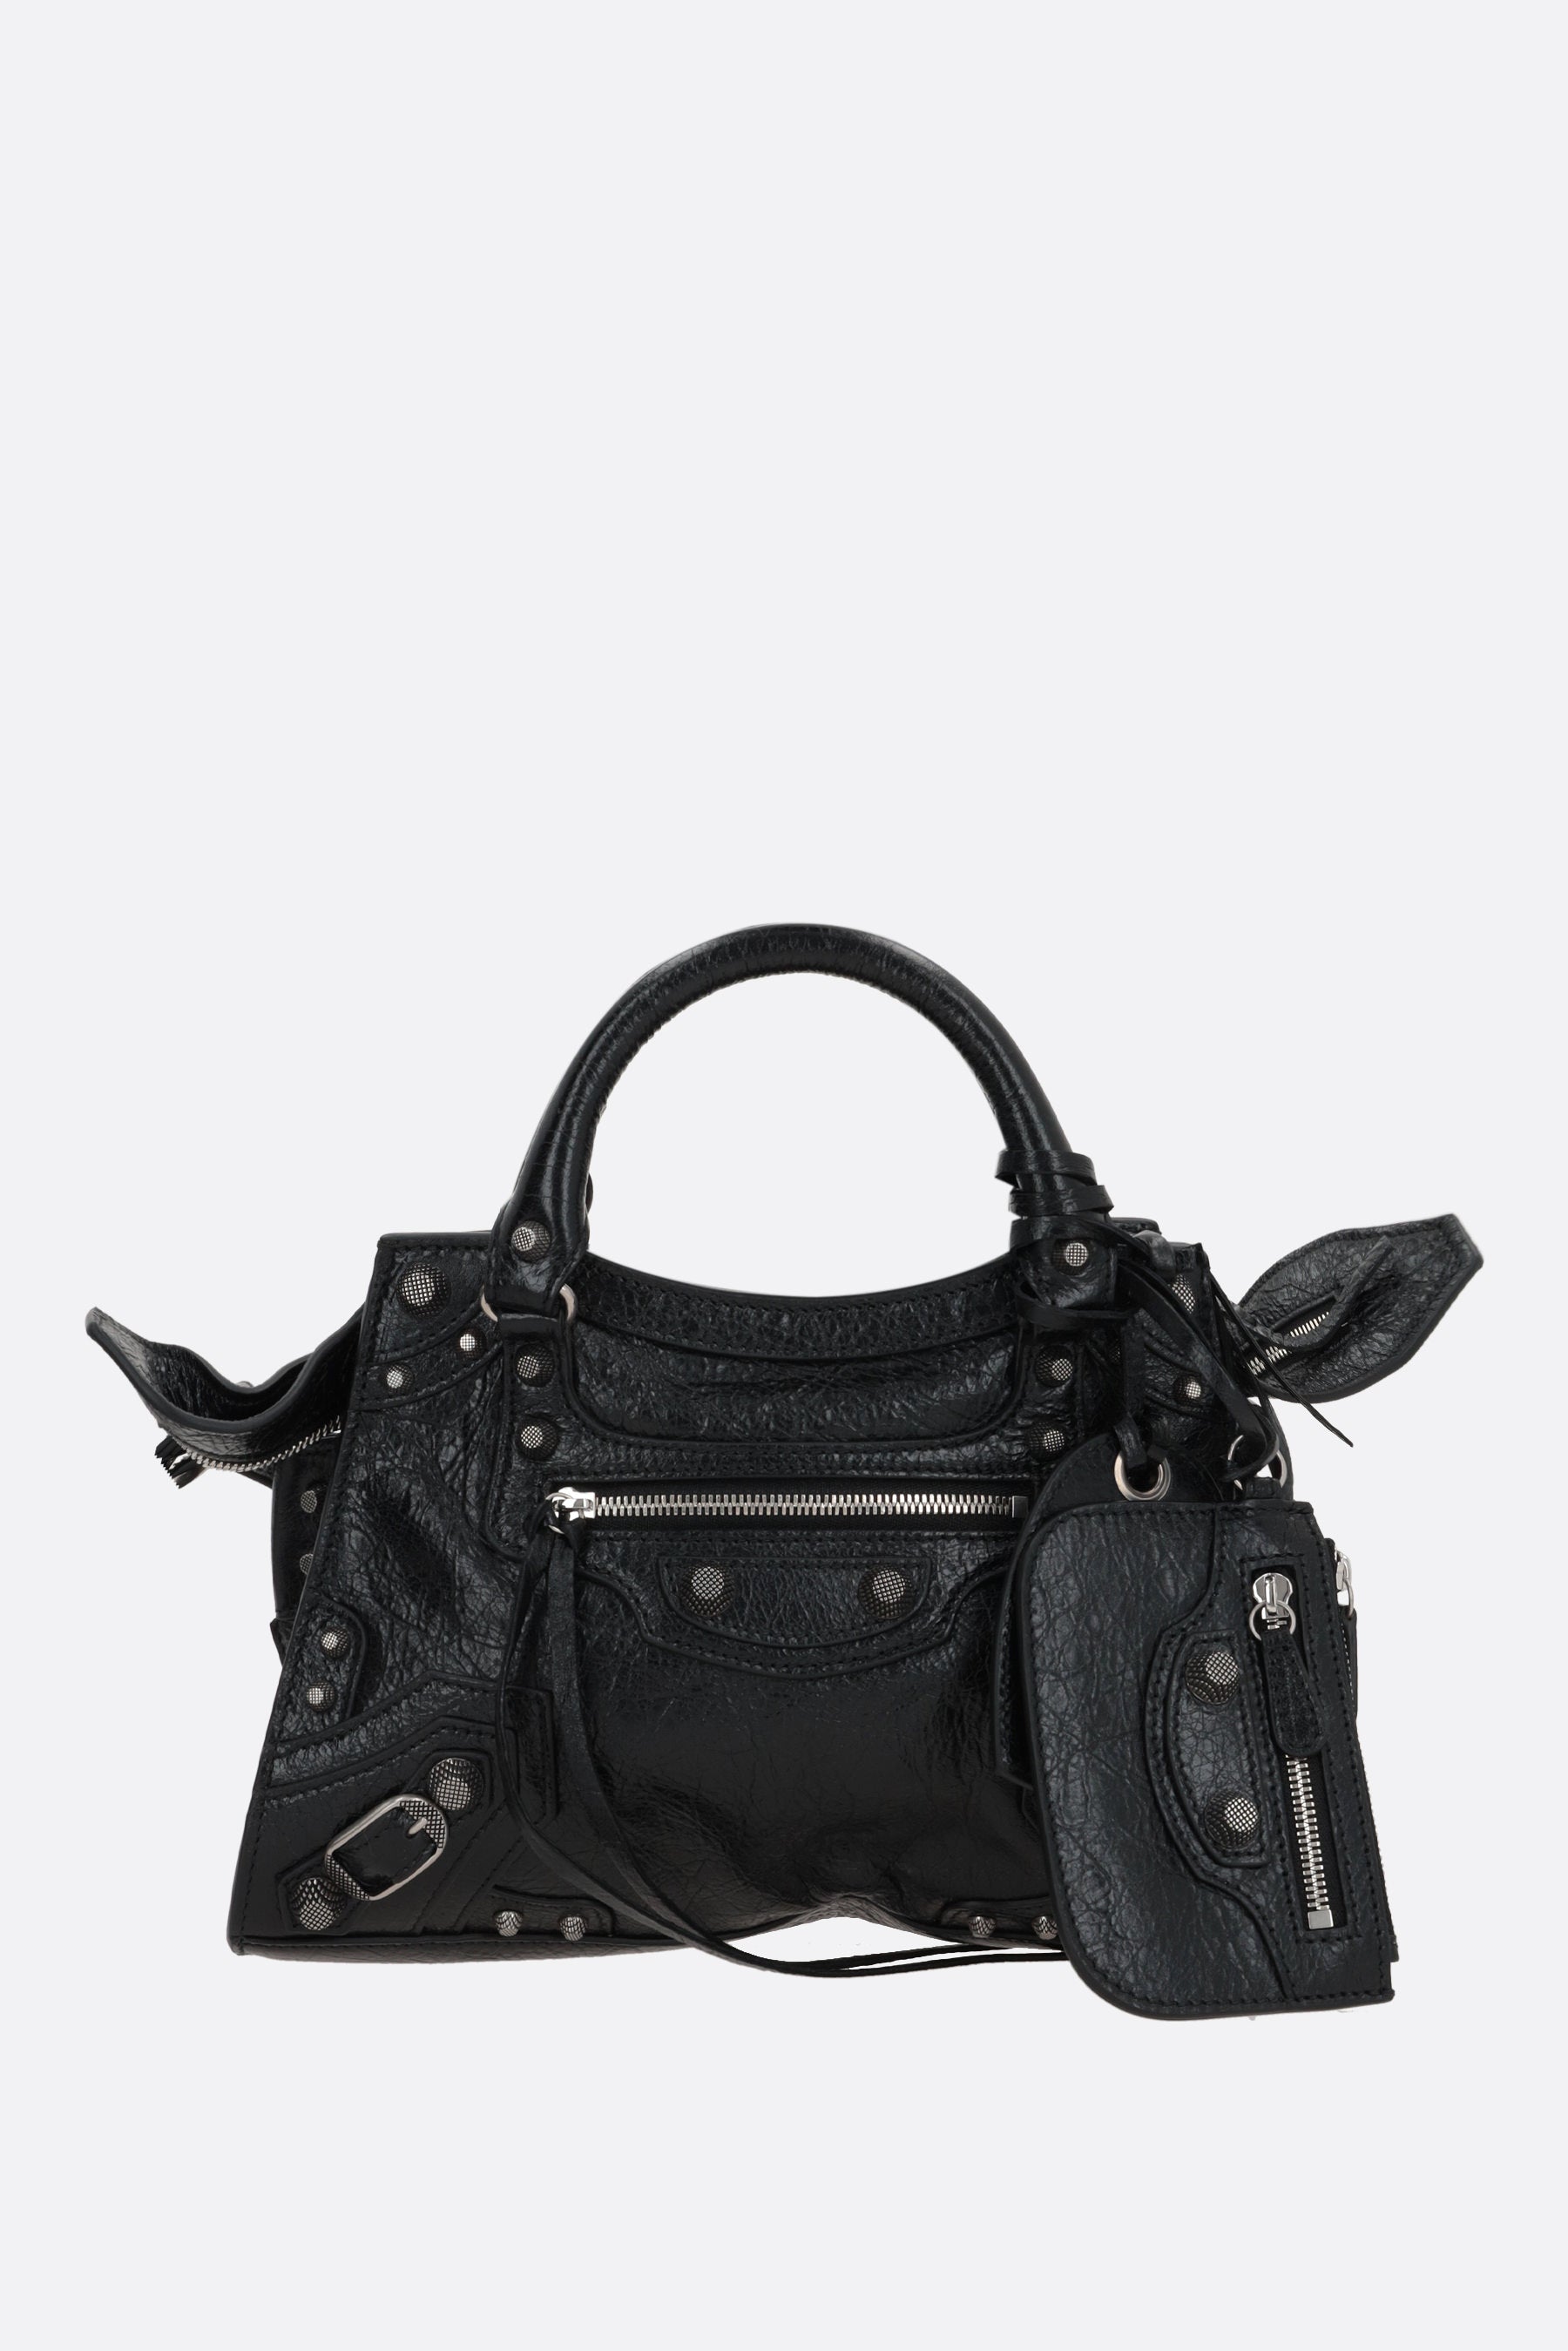 Neo Cagole XS handbag in Arena leather